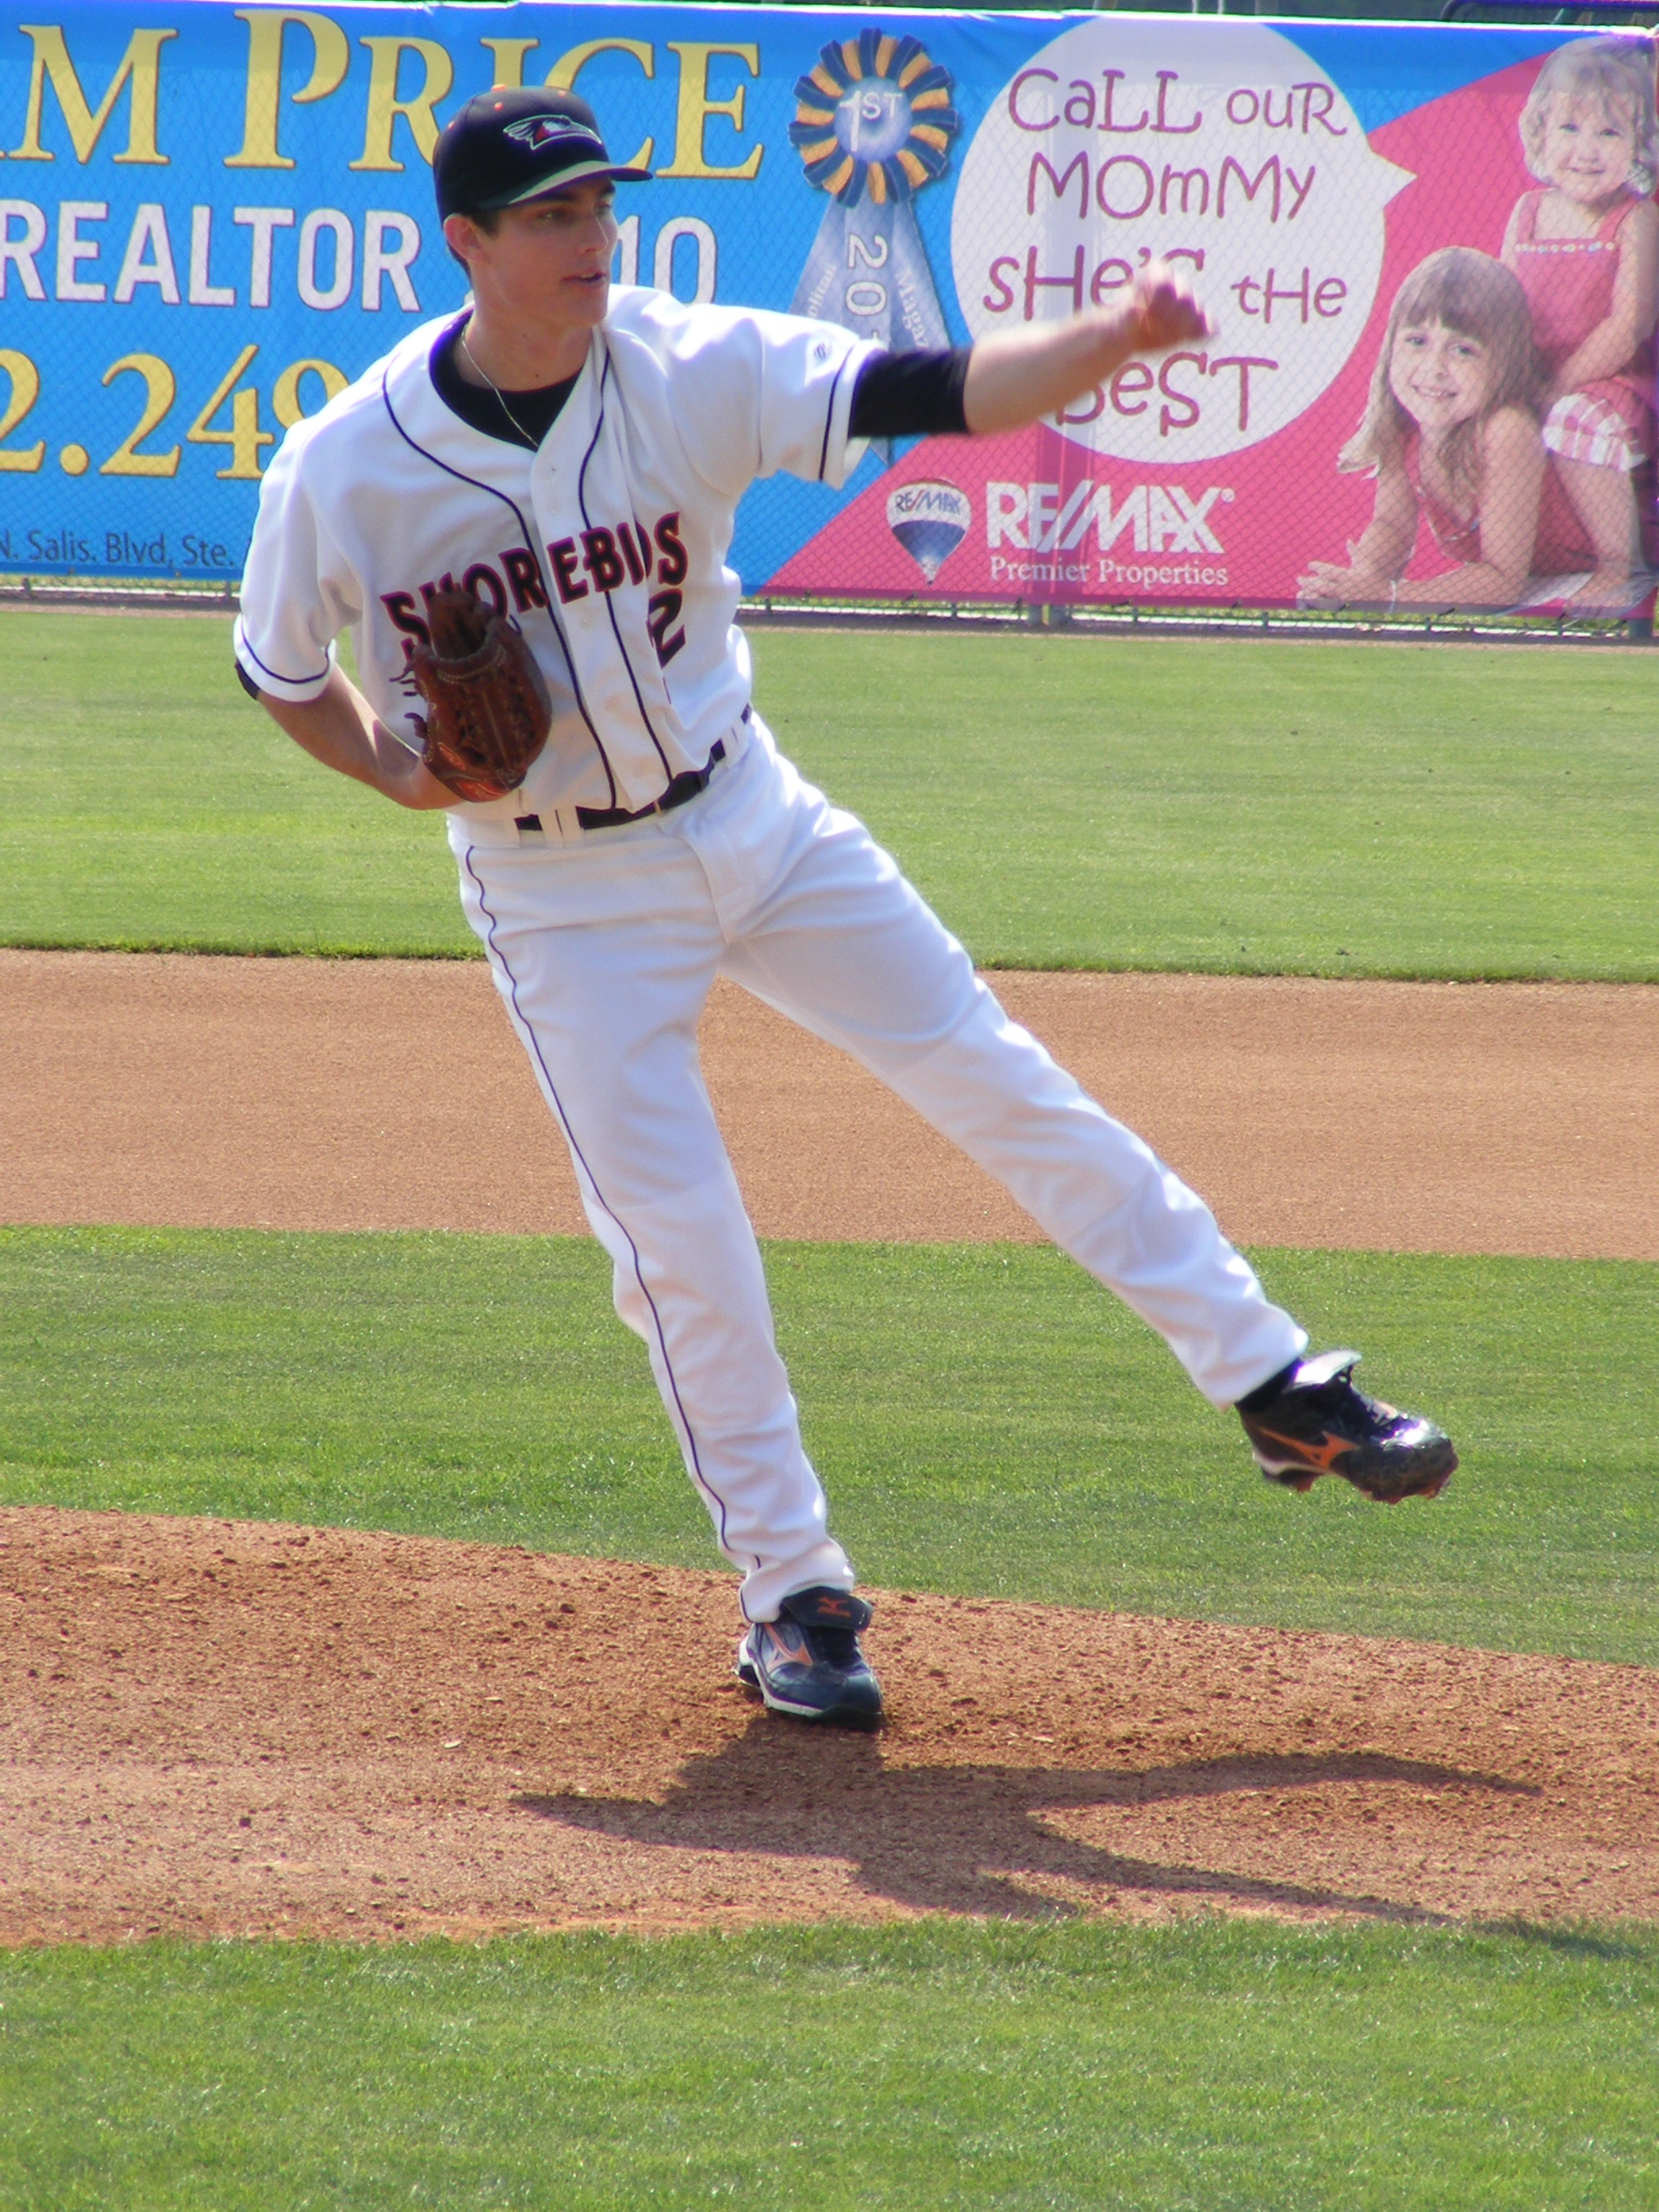 Tim Berry has been a strong presence in Delmarva's starting rotation.